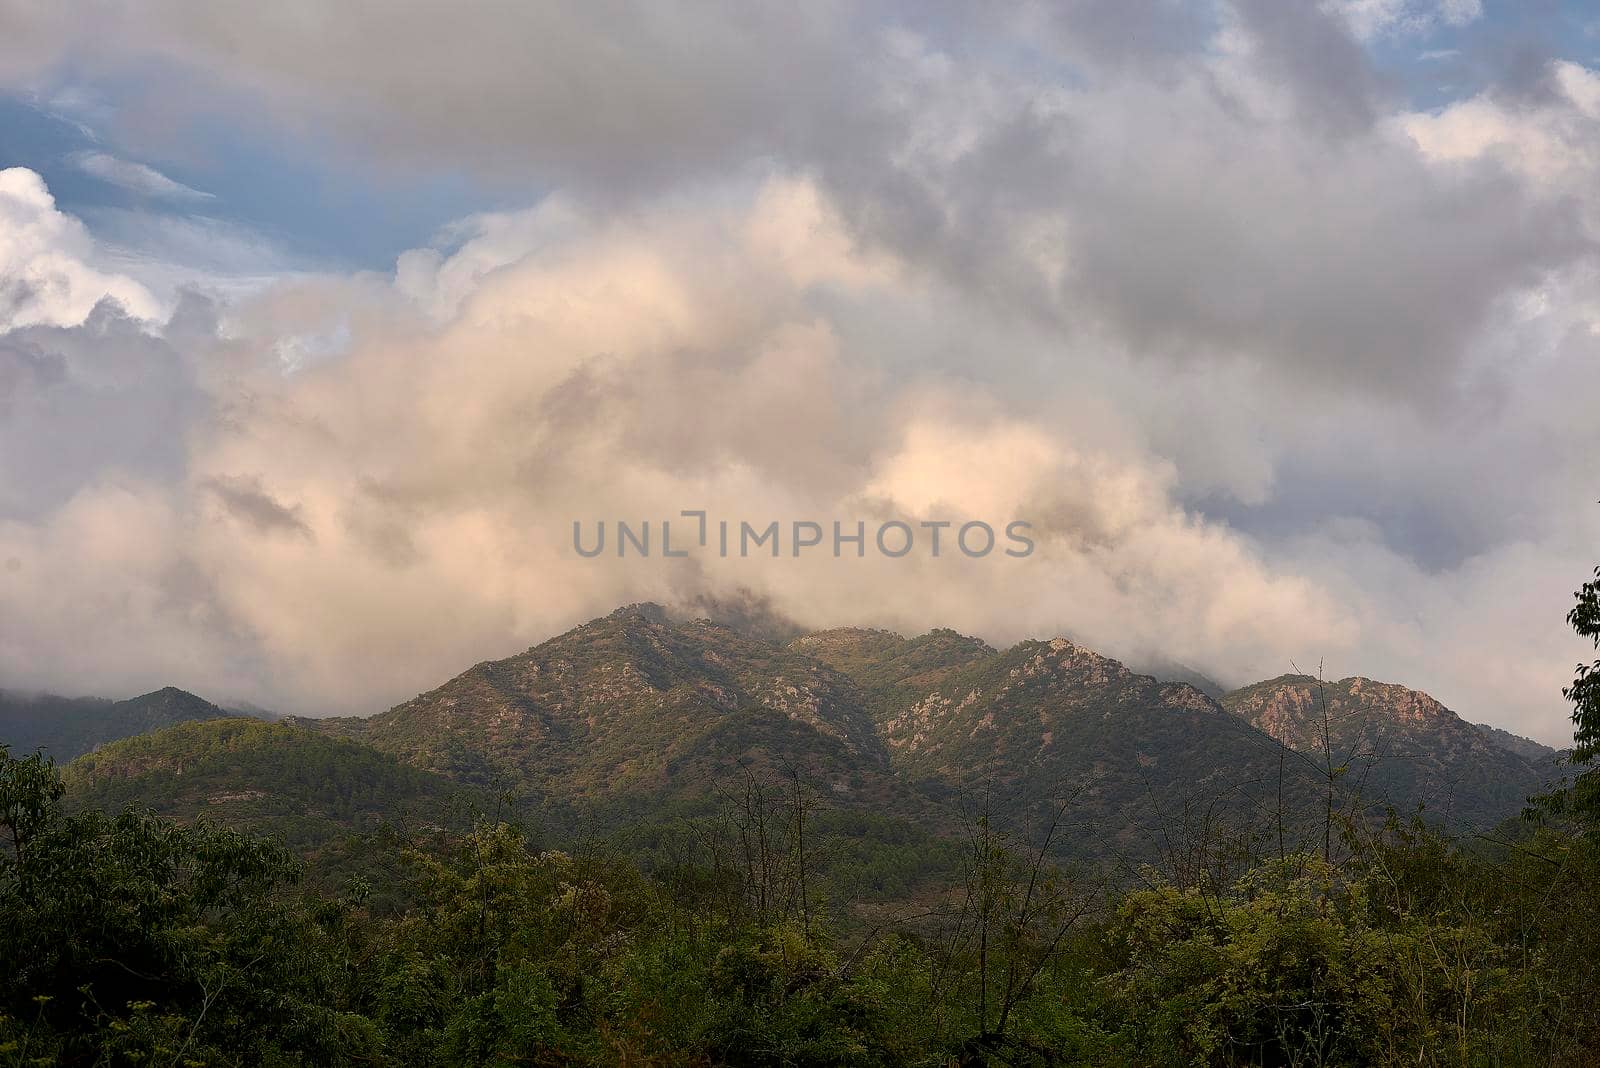 Mountain landscape surrounded by clouds and crop fields. Line composition, olive trees, low clouds, pines, greens, shades of green.